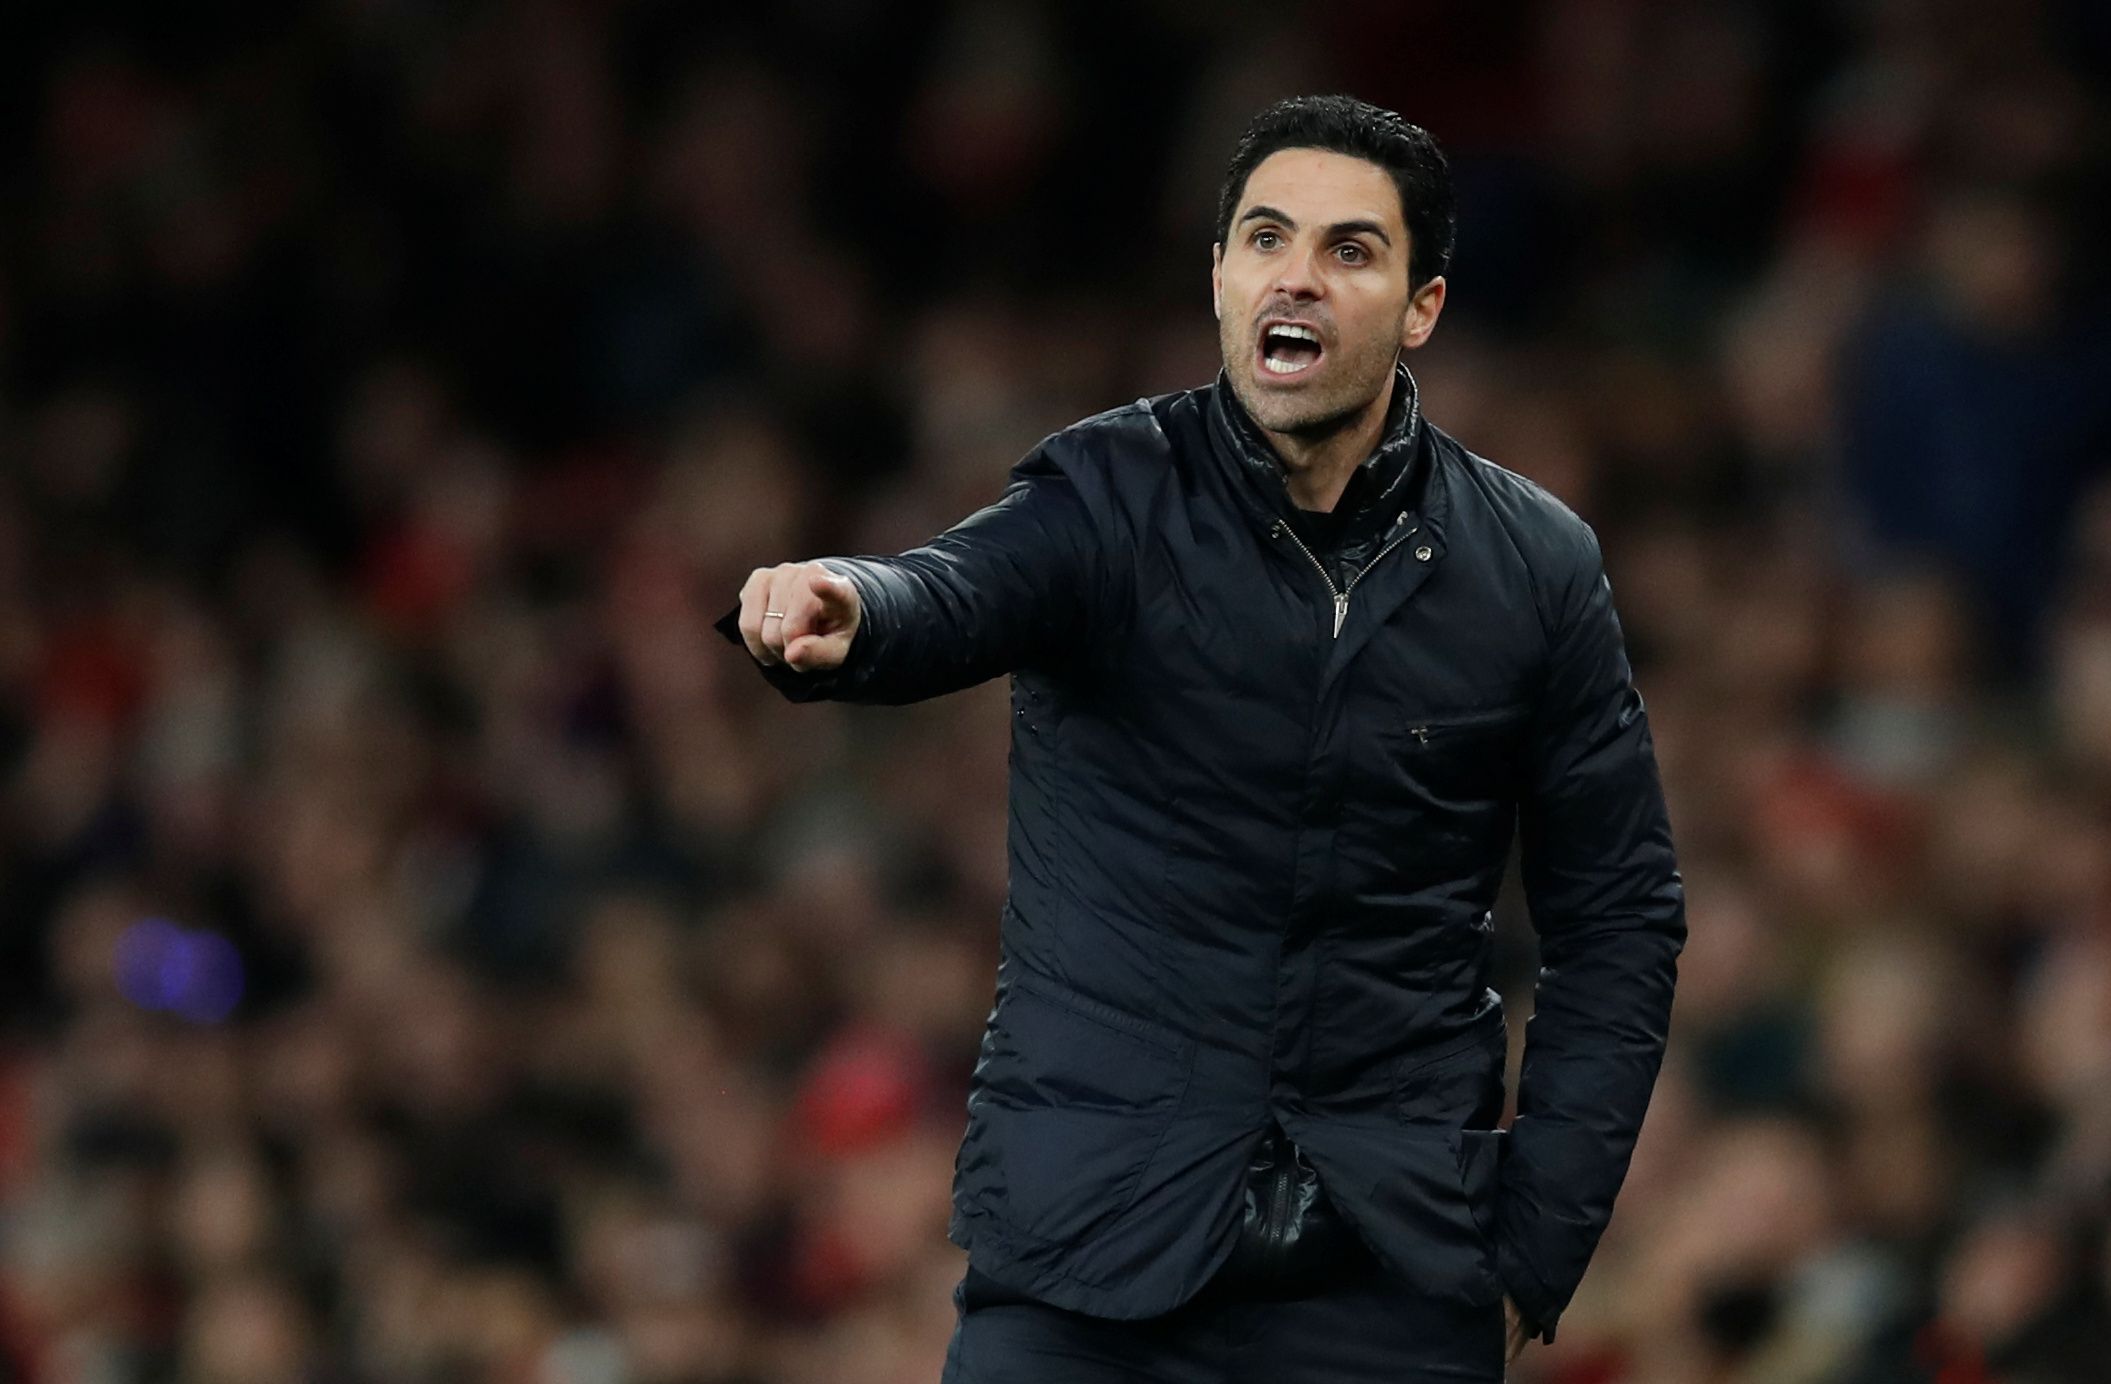 Soccer Football - Premier League - Arsenal v Everton - Emirates Stadium, London, Britain - February 23, 2020  Arsenal manager Mikel Arteta reacts REUTERS/David Klein  EDITORIAL USE ONLY. No use with unauthorized audio, video, data, fixture lists, club/league logos or 